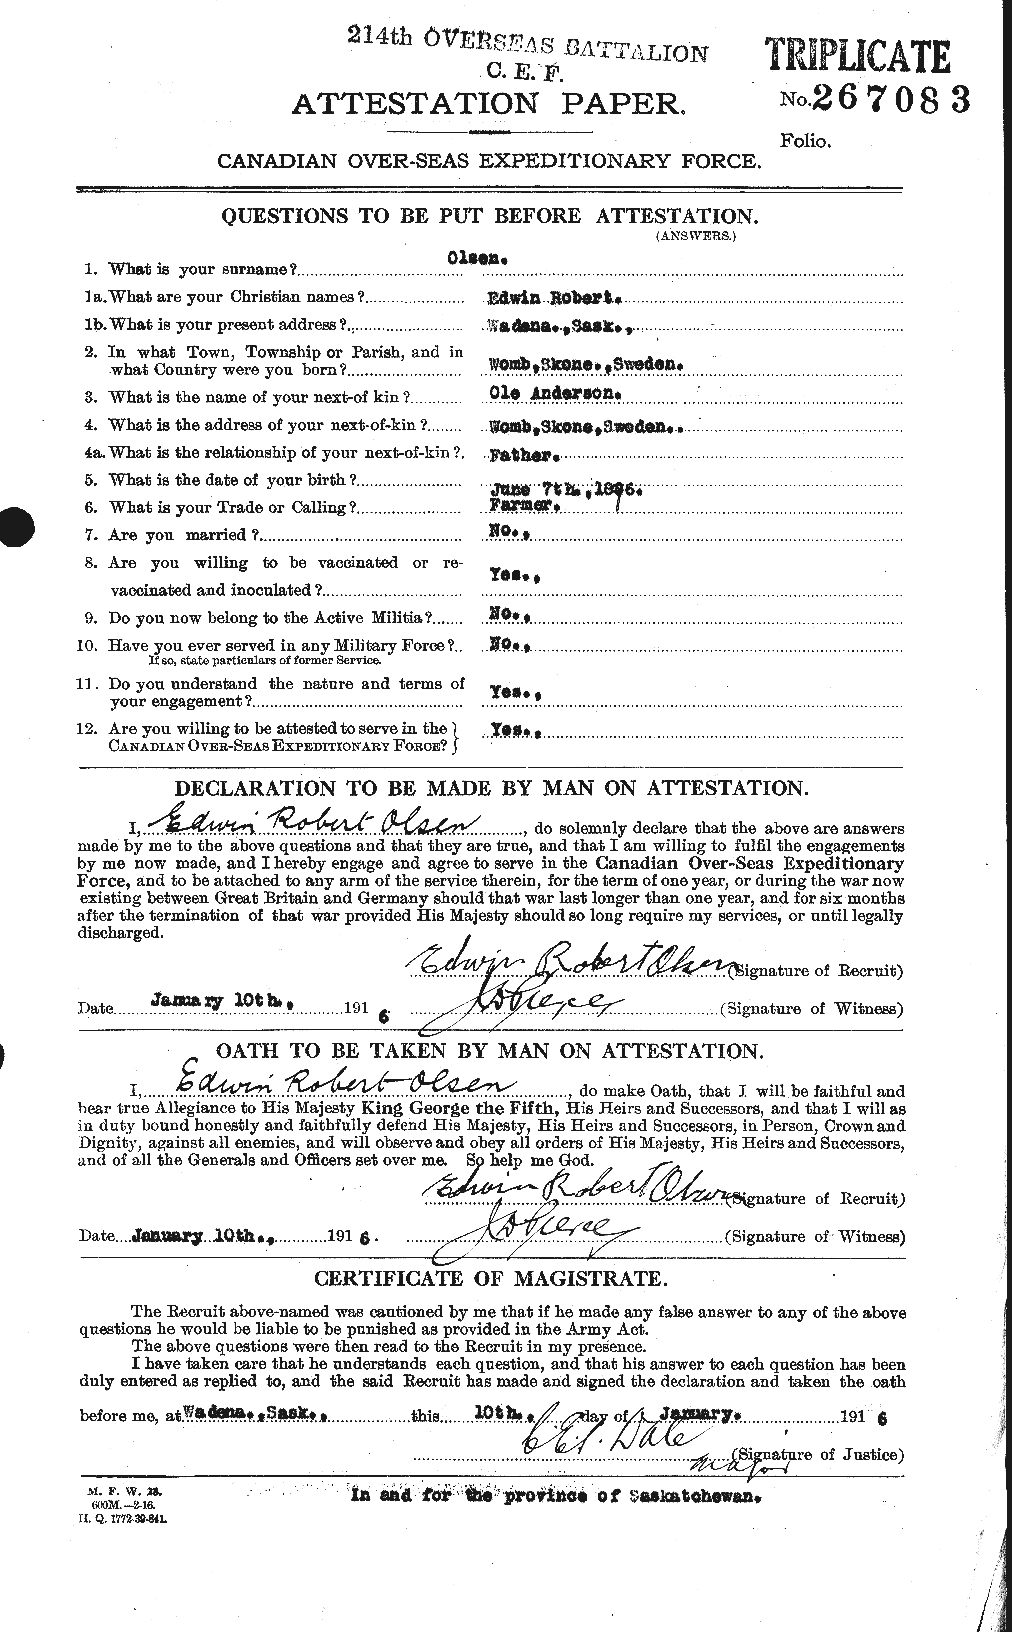 Personnel Records of the First World War - CEF 555774a